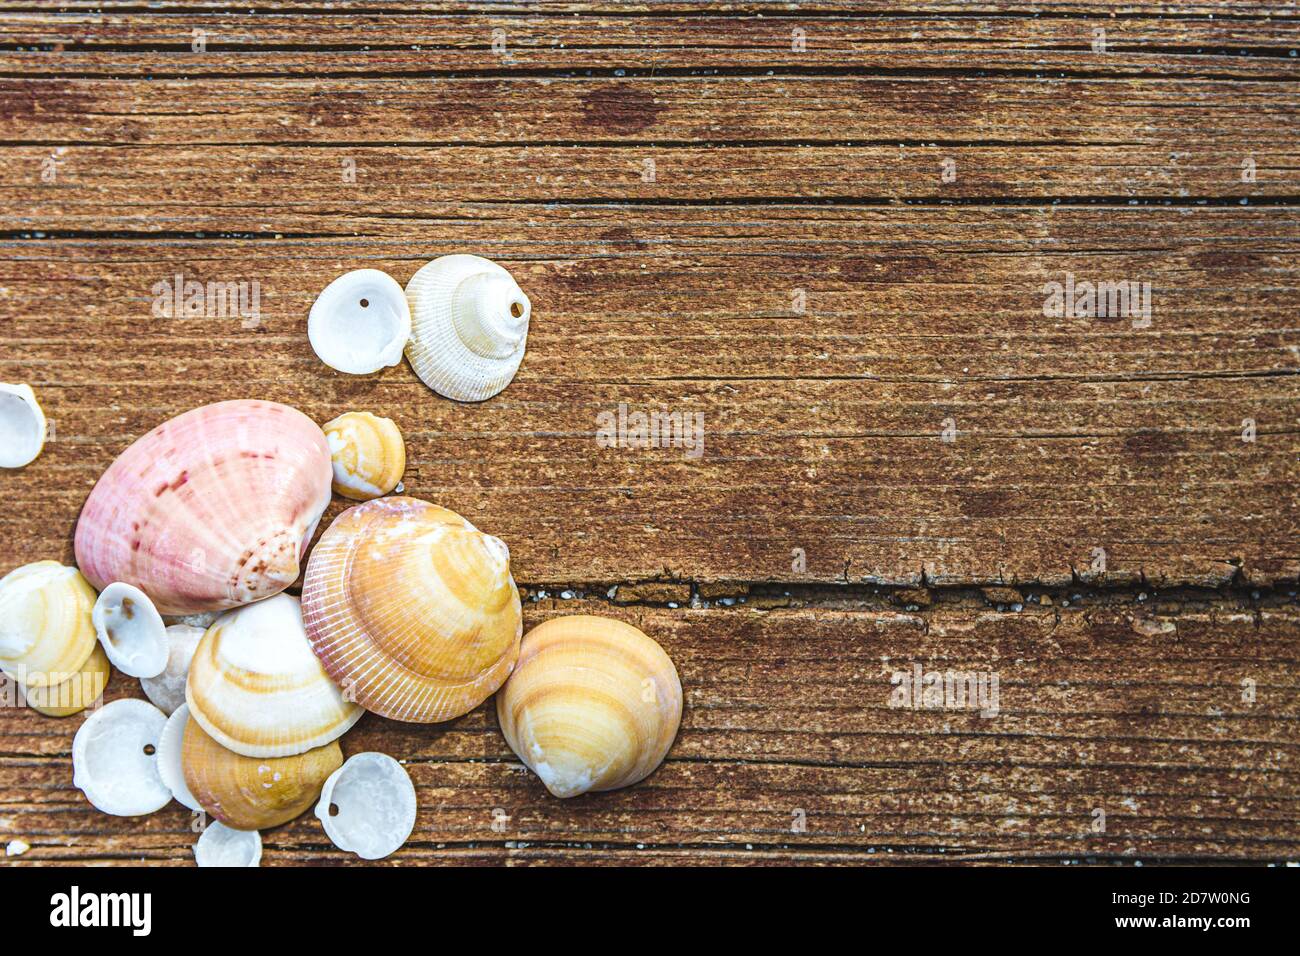 group of clam shells of different sizes and shades on an aged textured wooden board Stock Photo